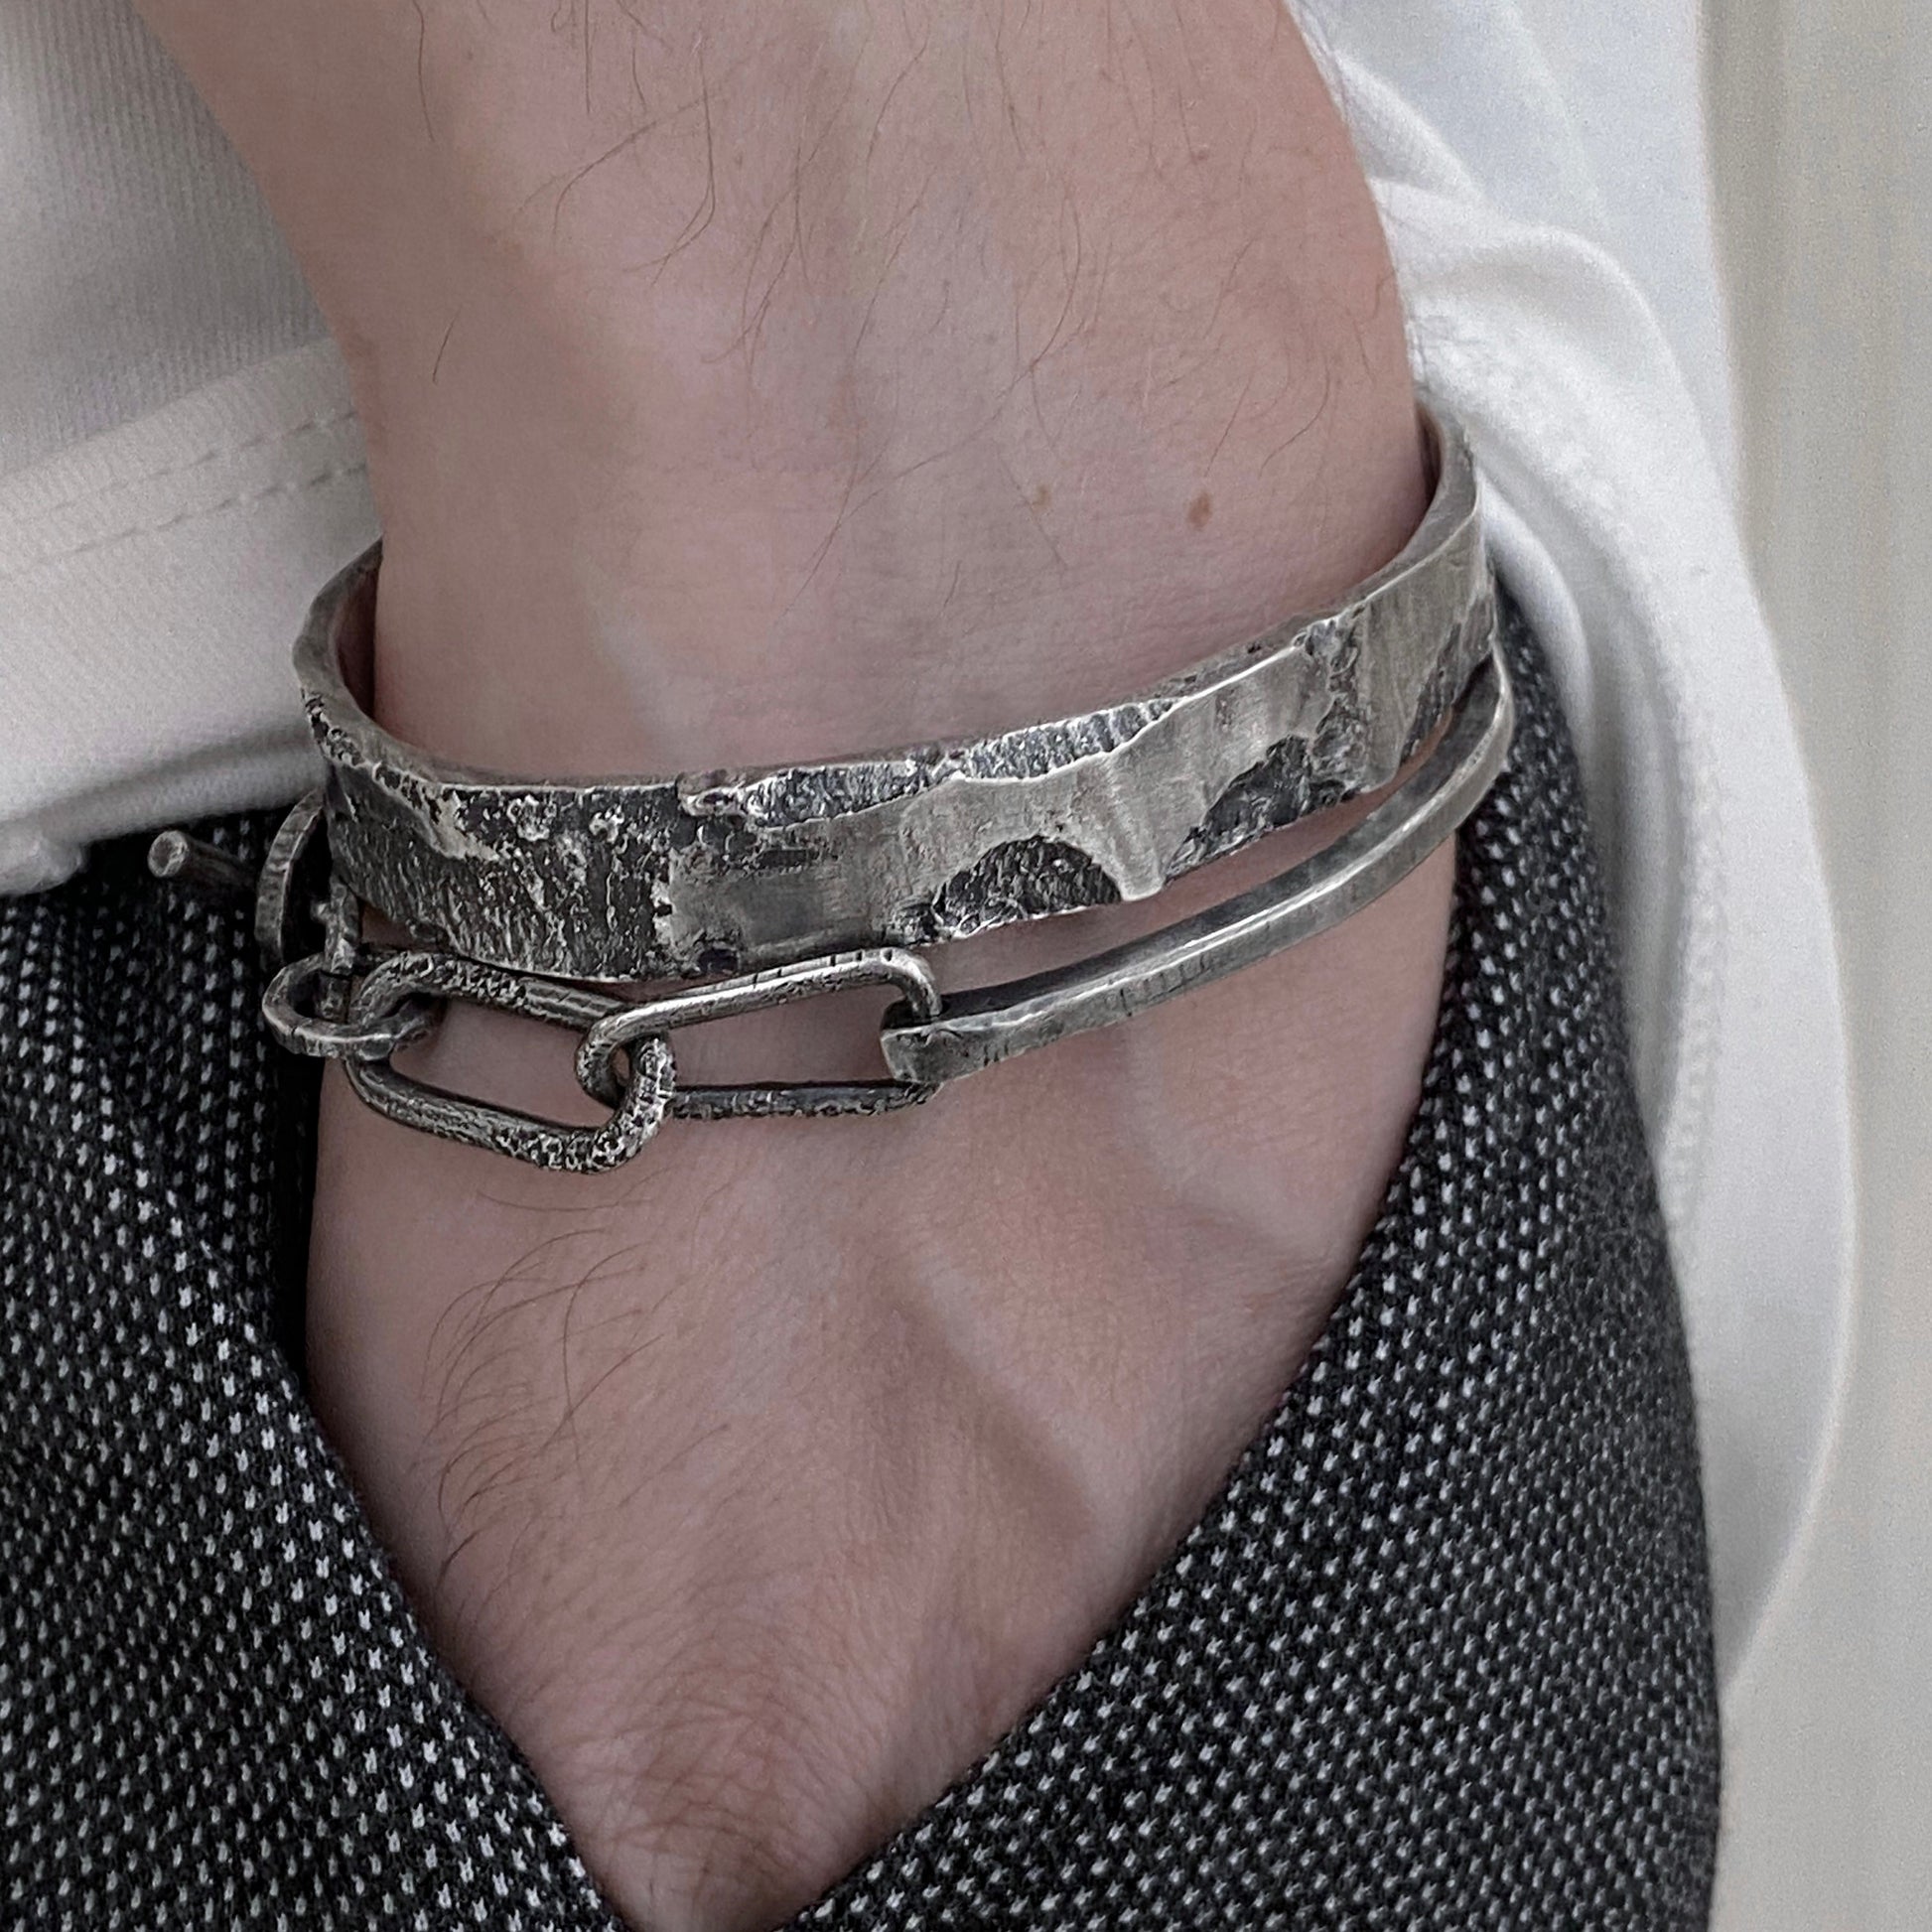 Milky way bangle- Сhunky silver cuff bracelet with unusual texture Bracelets Project50g 